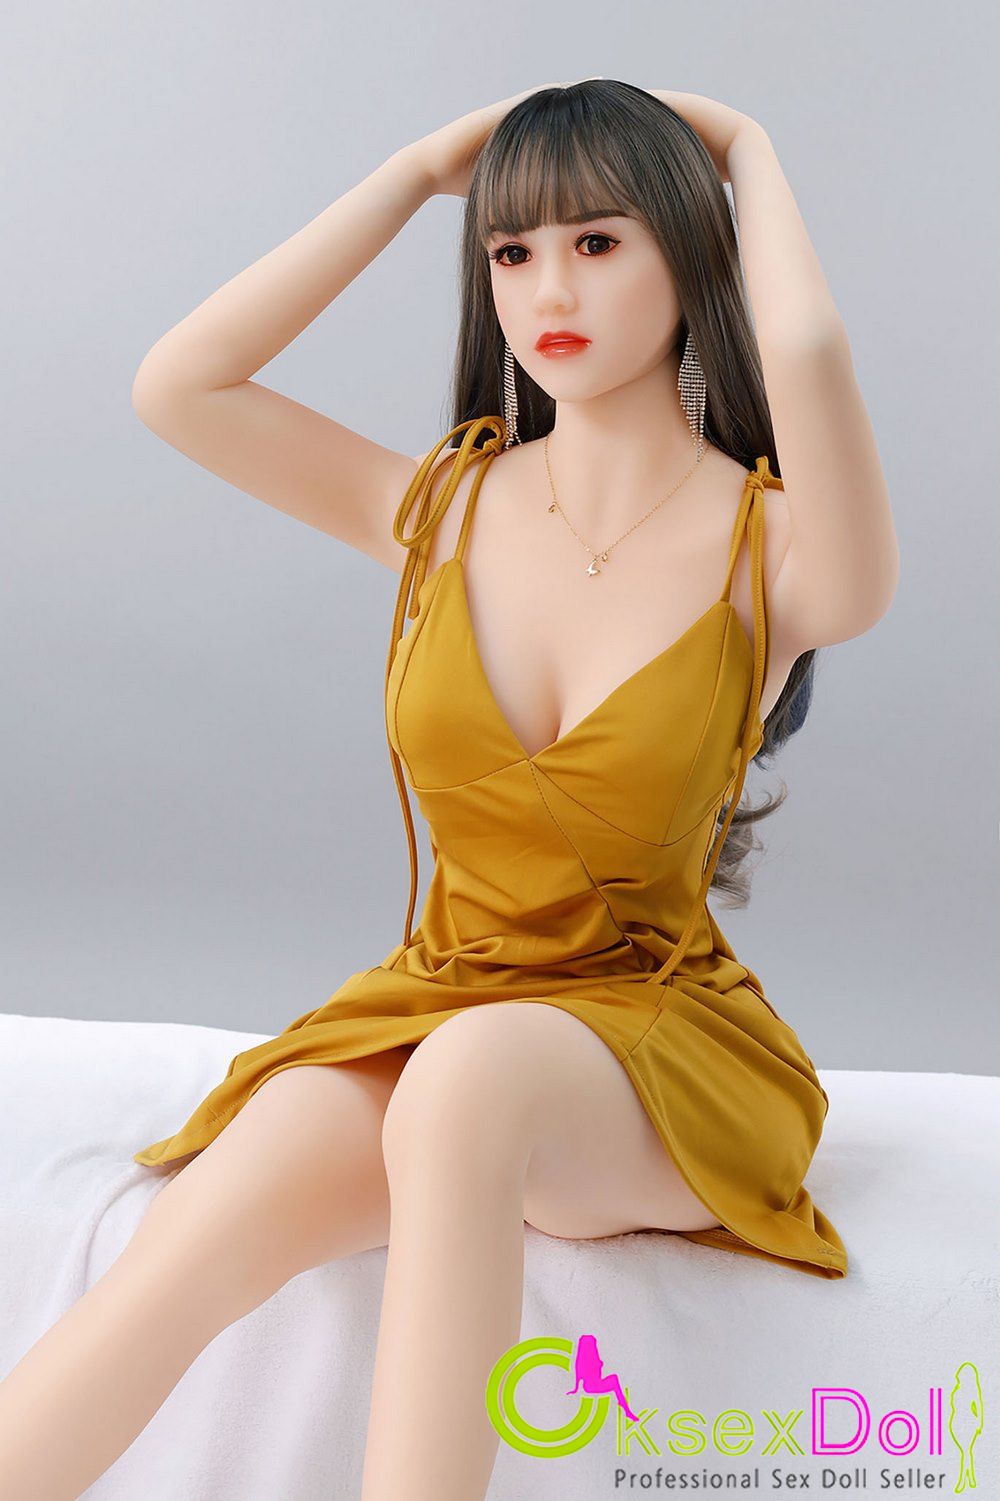 Japanese Life Size Sex Doll pic